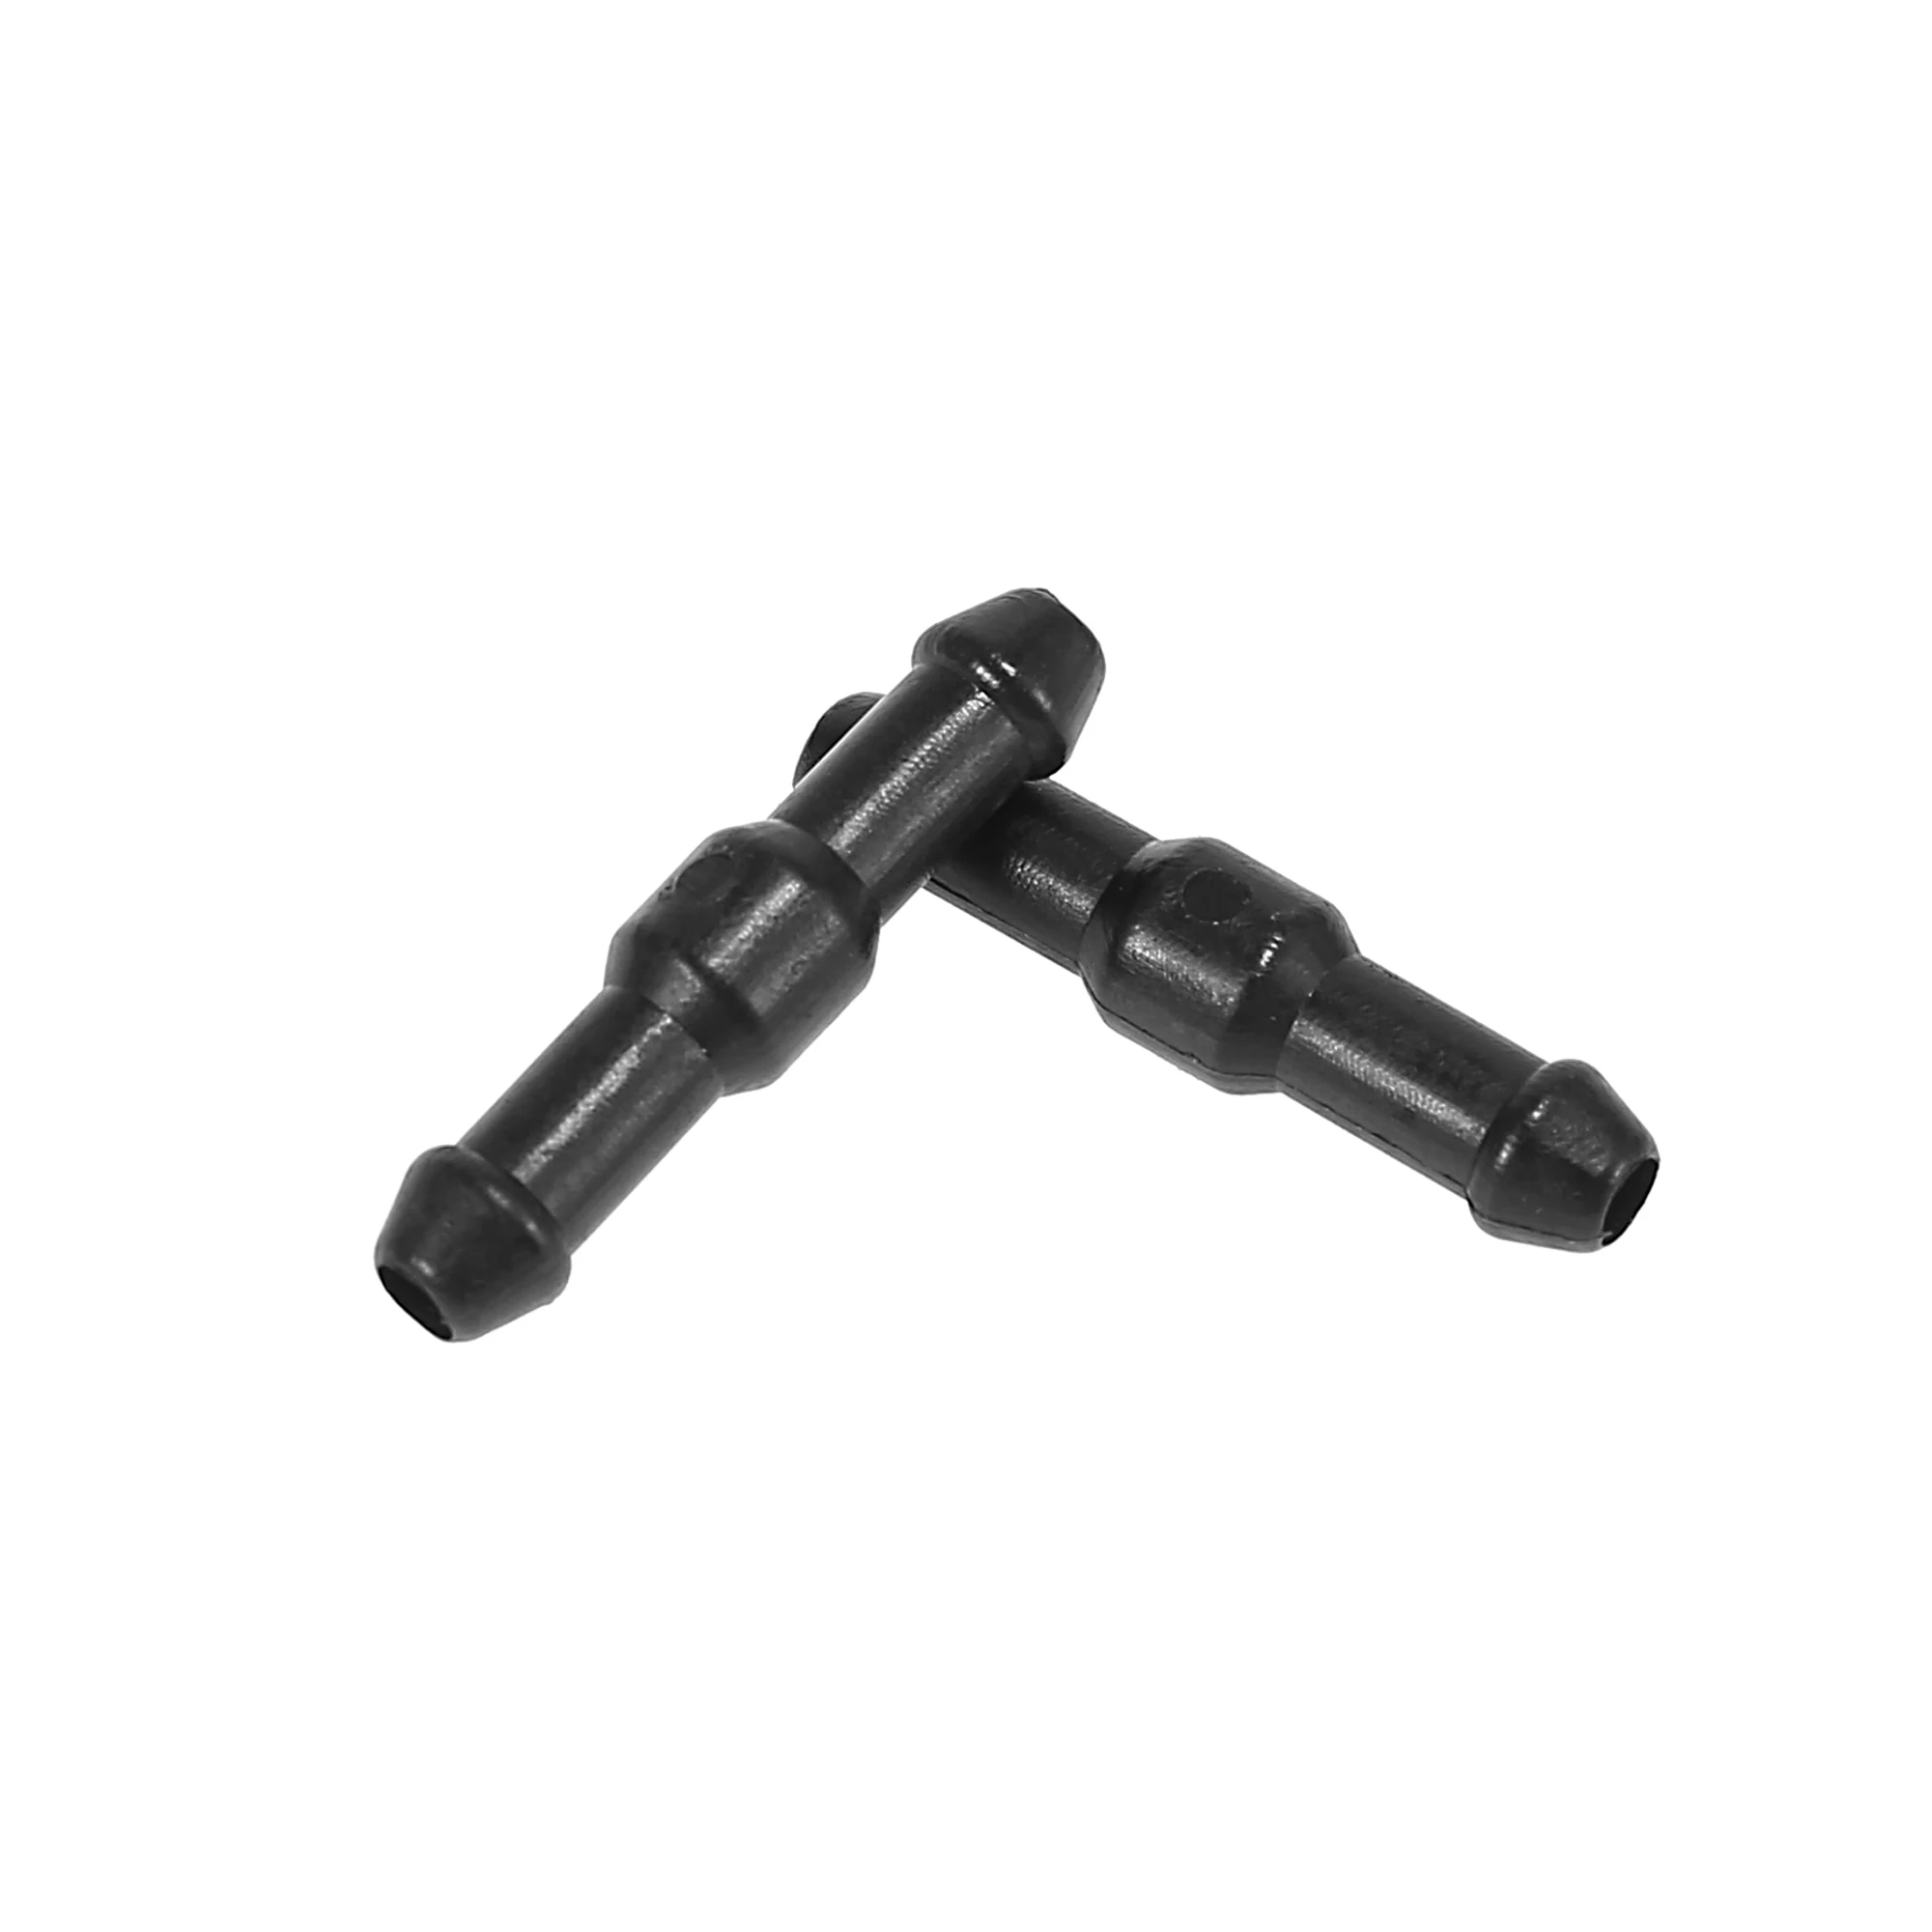 X AUTOHAUX 10pcs T Shaped Plastic 3 Way Windshield Washer Hose Connector Tube Pipe Fitting Splitter Adapter for Car 